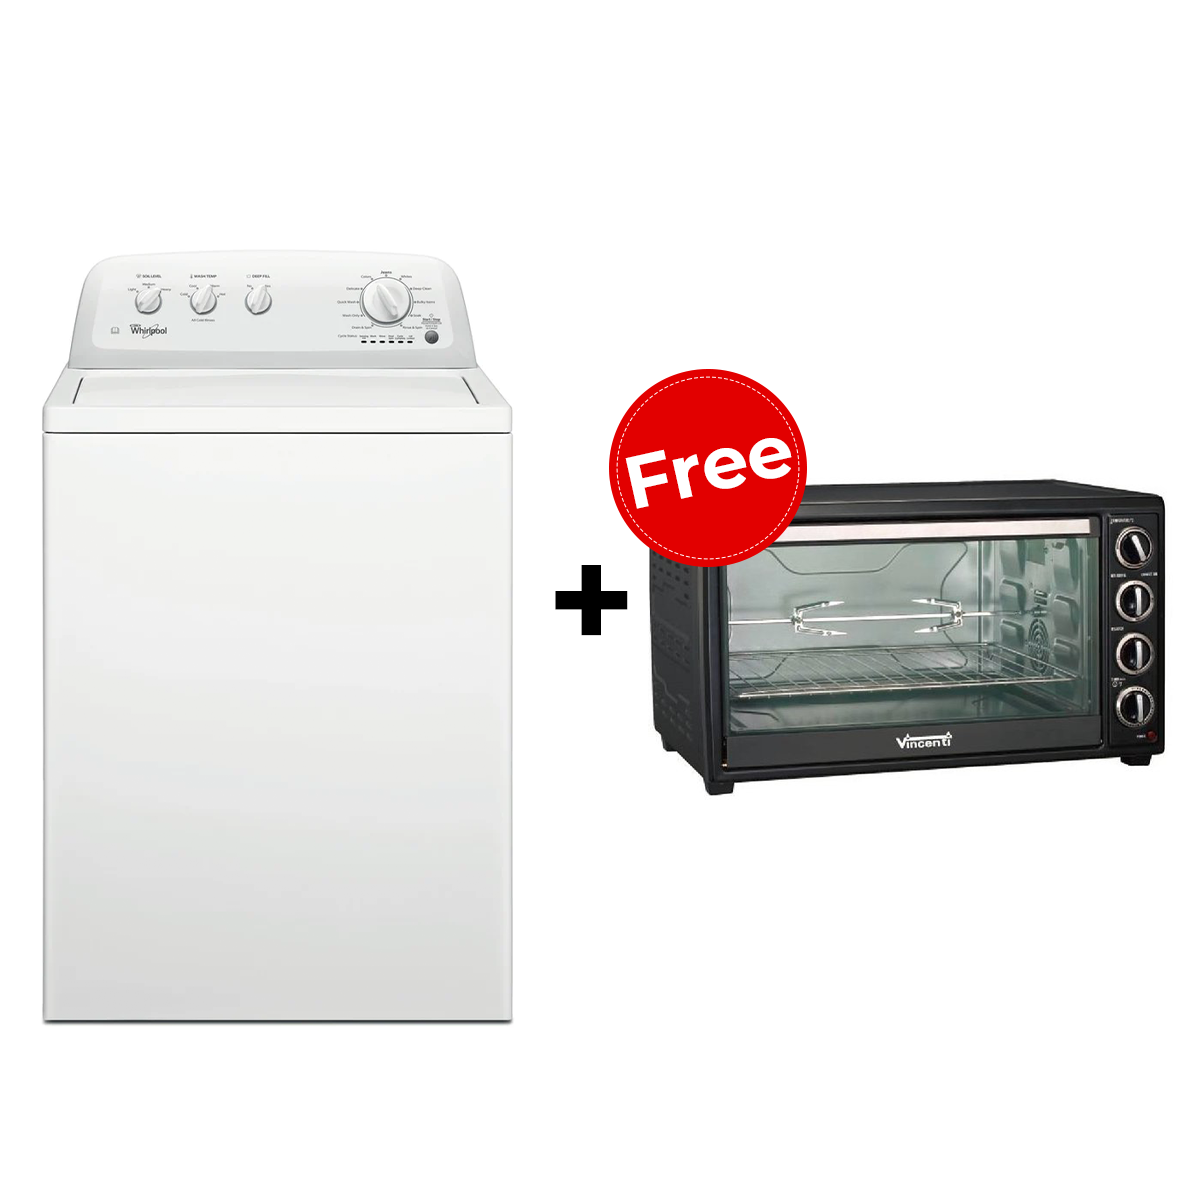 Ramadan Special Offer - WASHING MACHINE = VINCENTI 60L ELECTRIC OVEN FREE